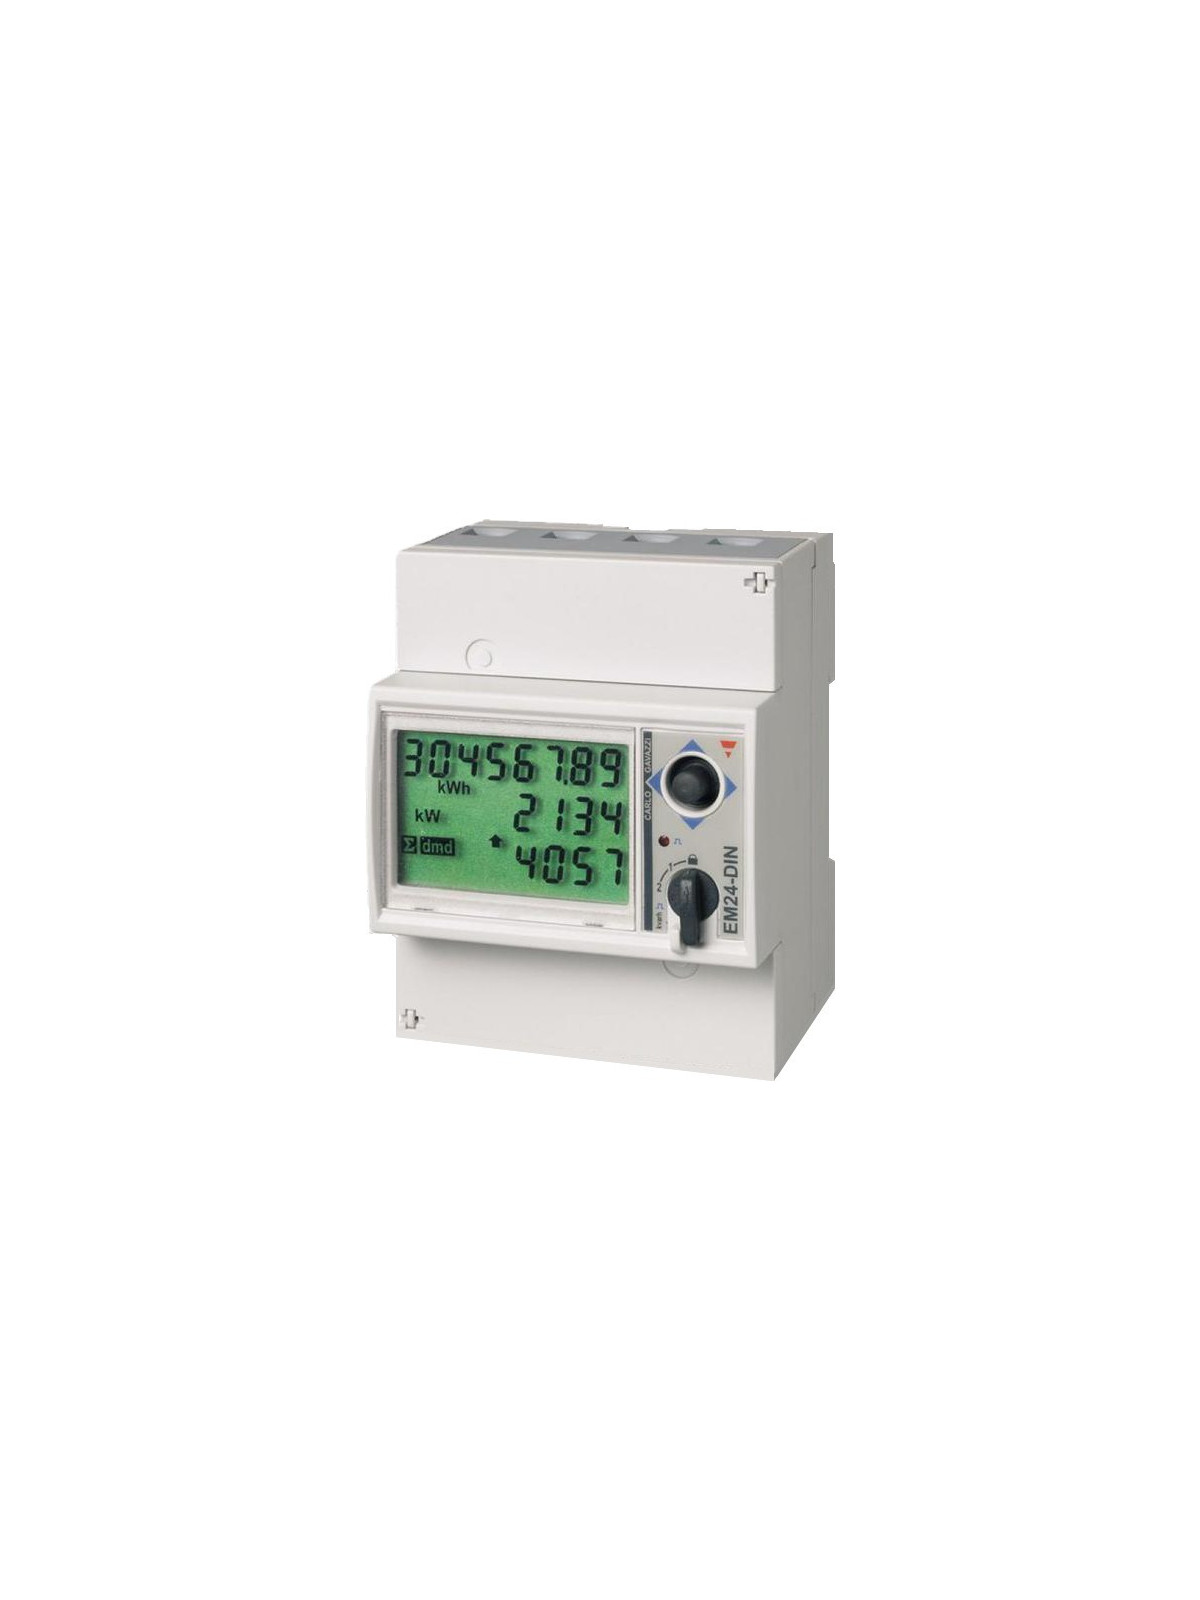 Victron energiemeter - 65A max